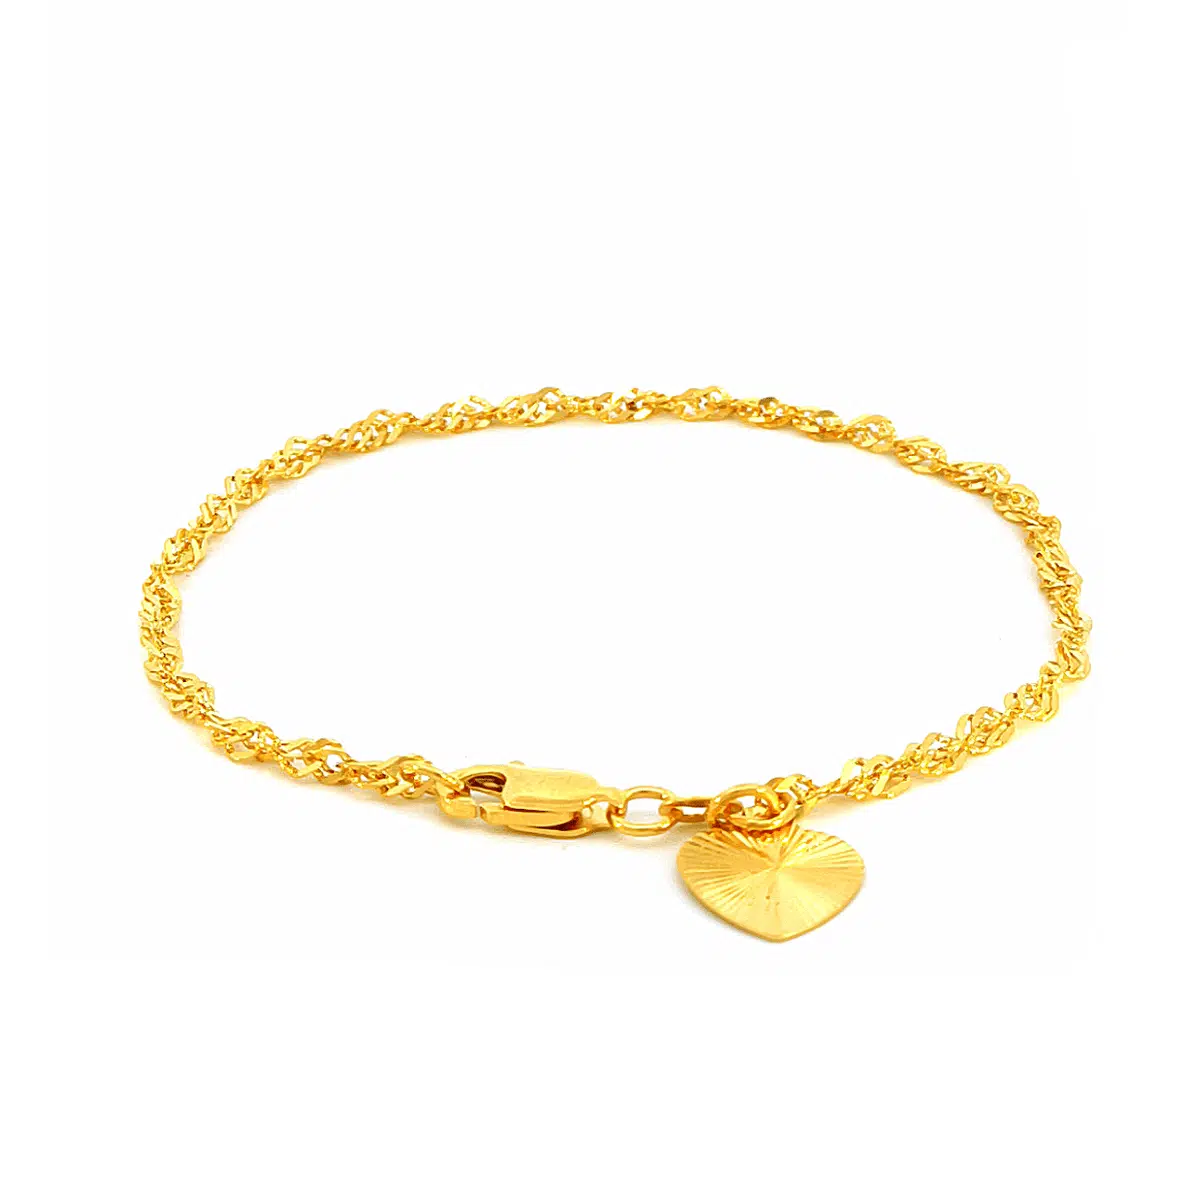 22k Solid Gold Bracelet - 8 Inches - 41.7 Grams - .916 Pure Gold –  917pawnshop